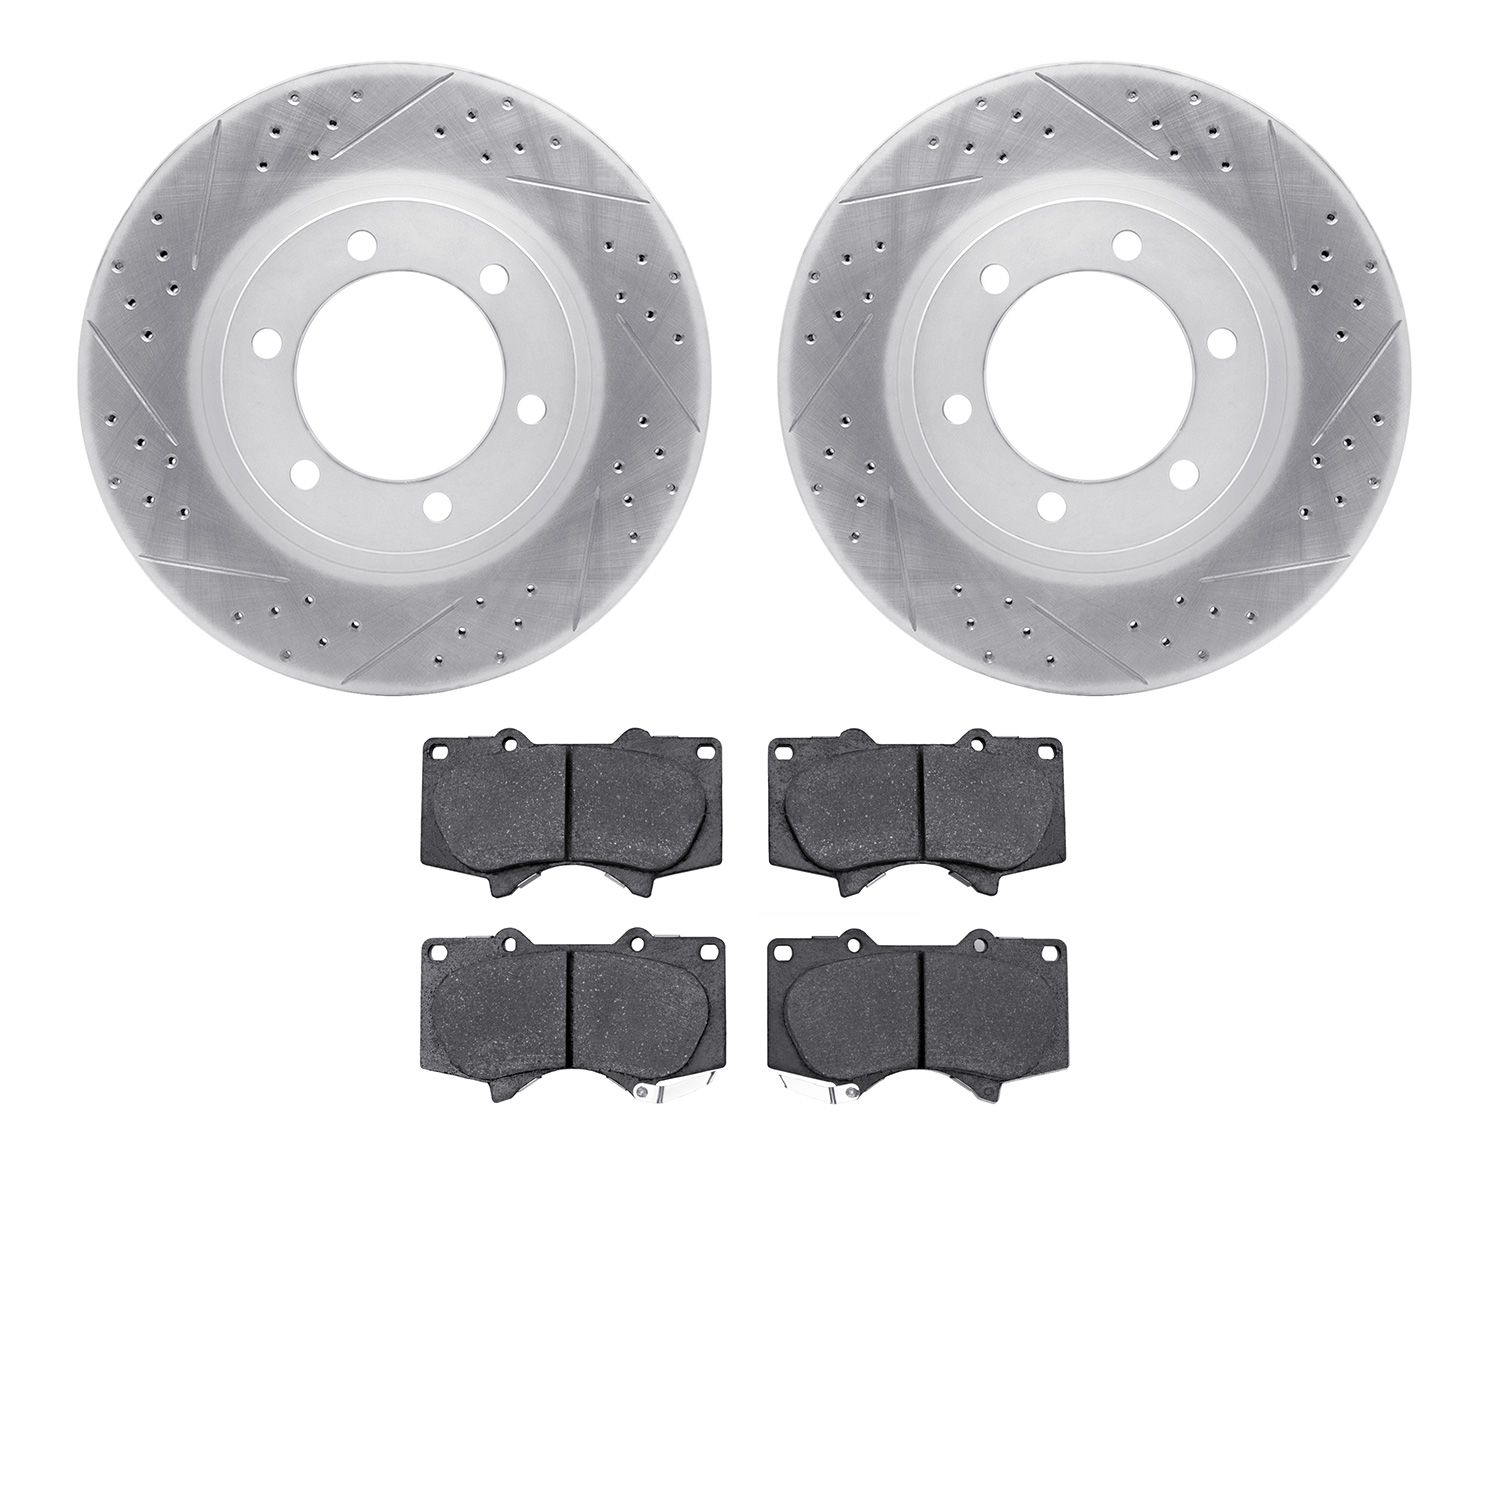 2202-76003 Geoperformance Drilled/Slotted Rotors w/Heavy-Duty Pads Kit, 2003-2009 Lexus/Toyota/Scion, Position: Front